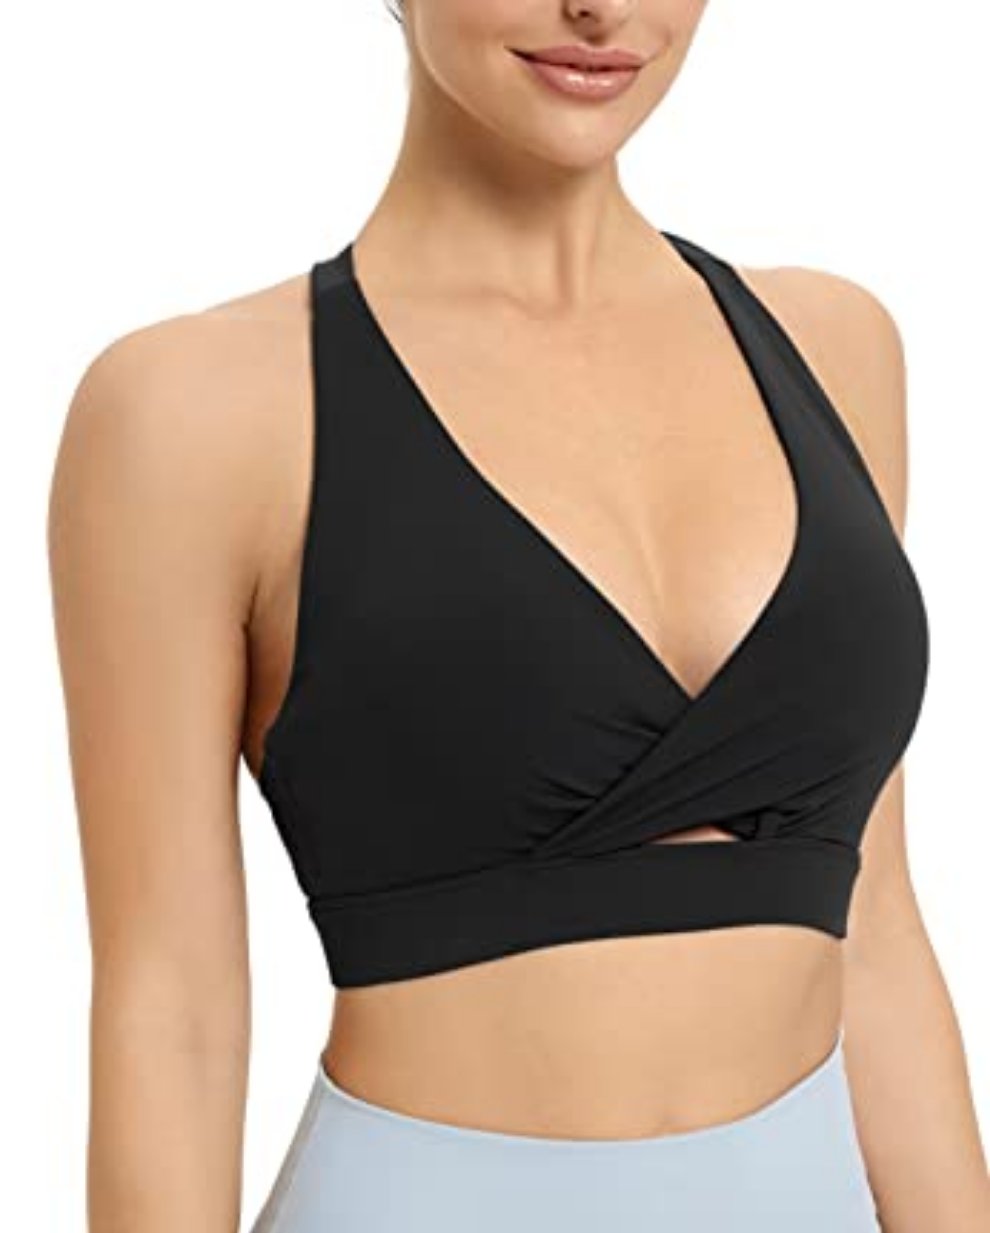 SCOOPLOVER Sexy Racerback Sports Bras for Women, V-Neck Low Impact Padded Breathable Sports Bras Yoga Bras (S, All Black)